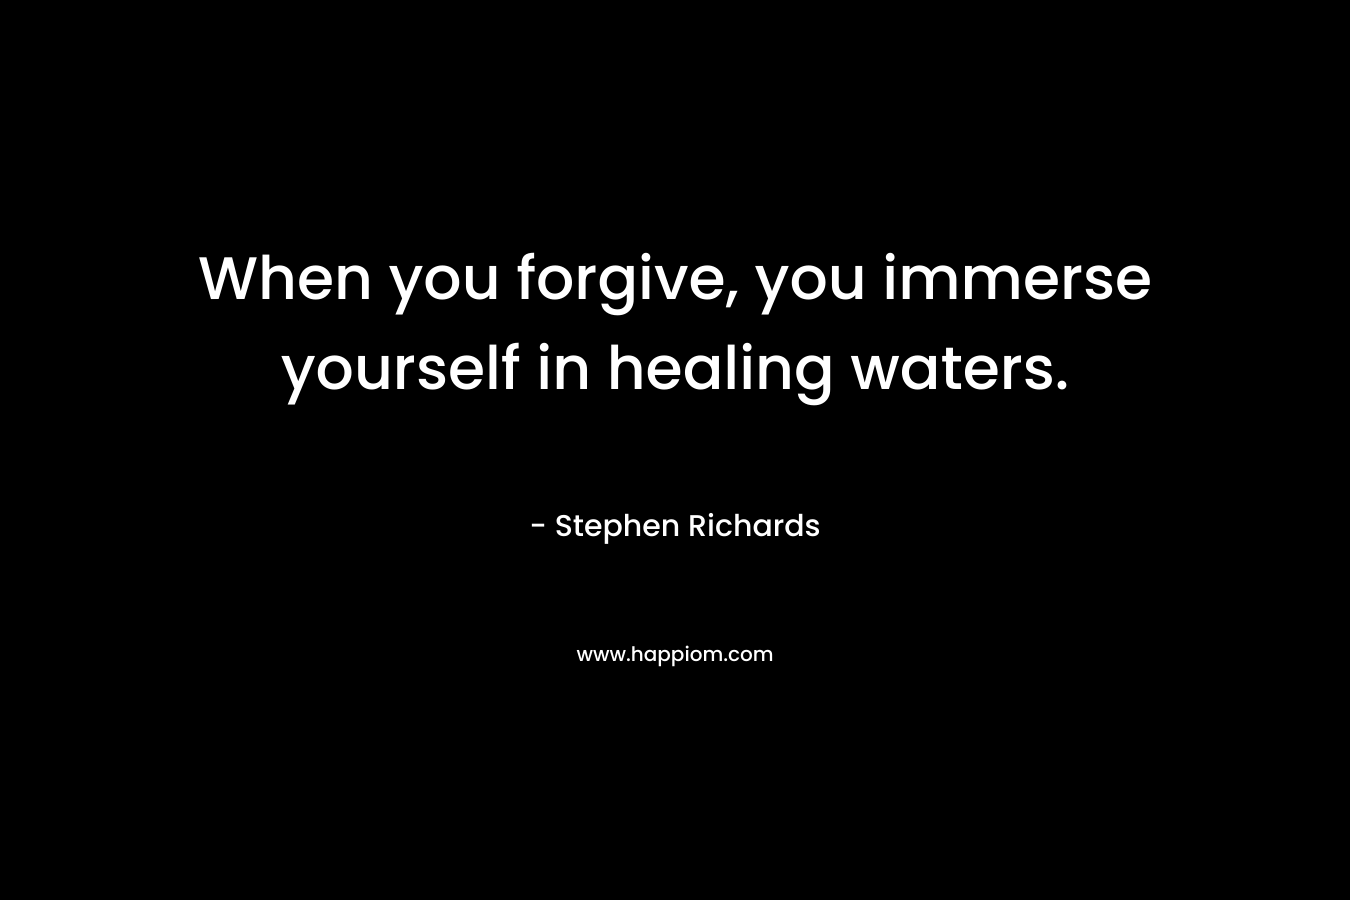 When you forgive, you immerse yourself in healing waters.